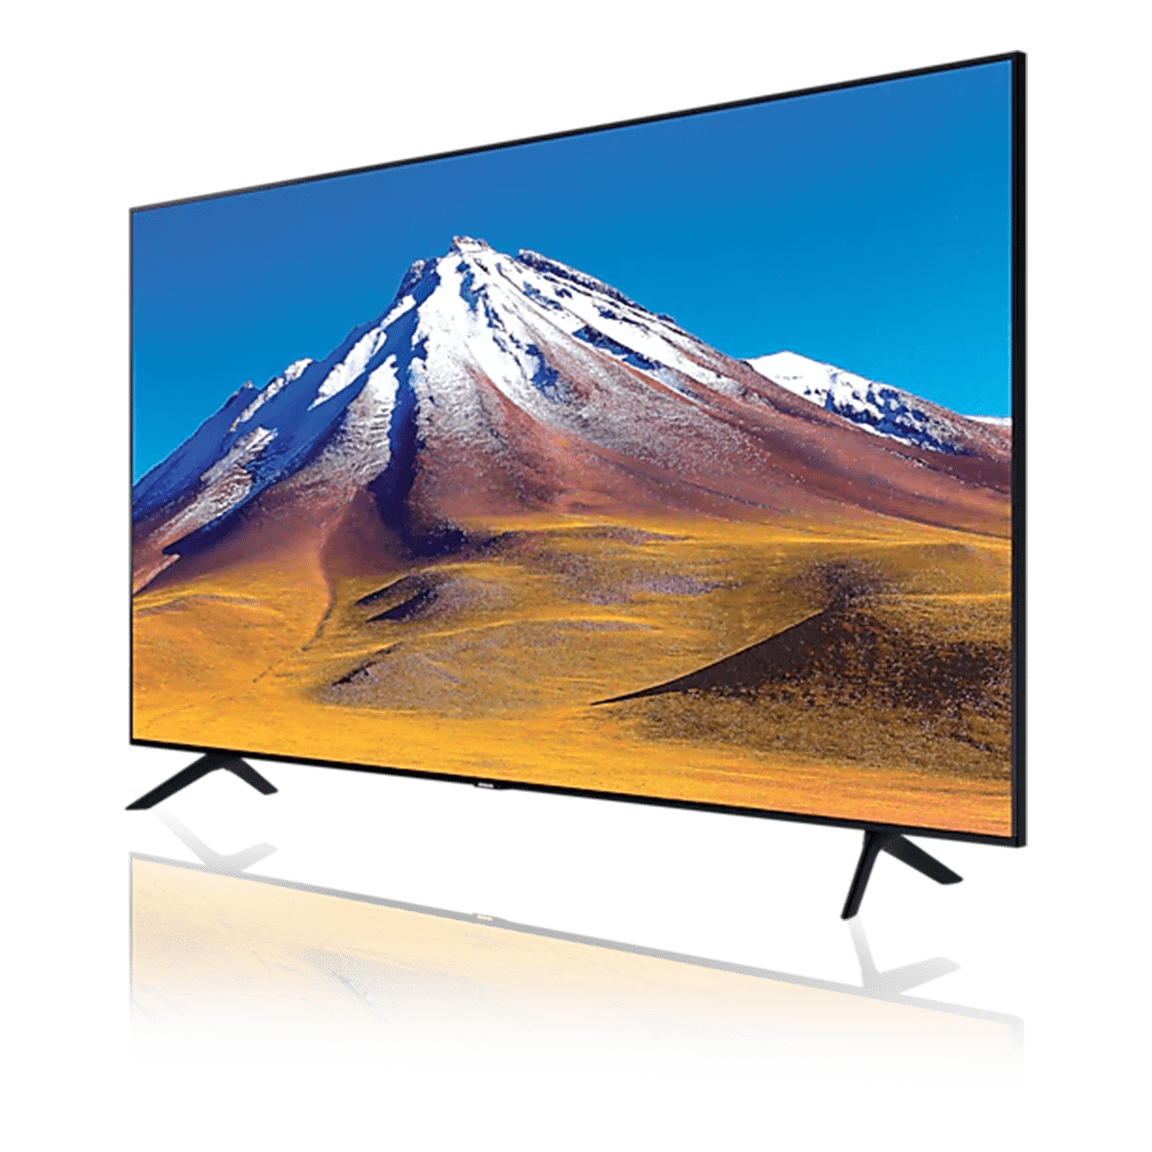 Black Samsung flat screen television displaying a picture of a large mountain